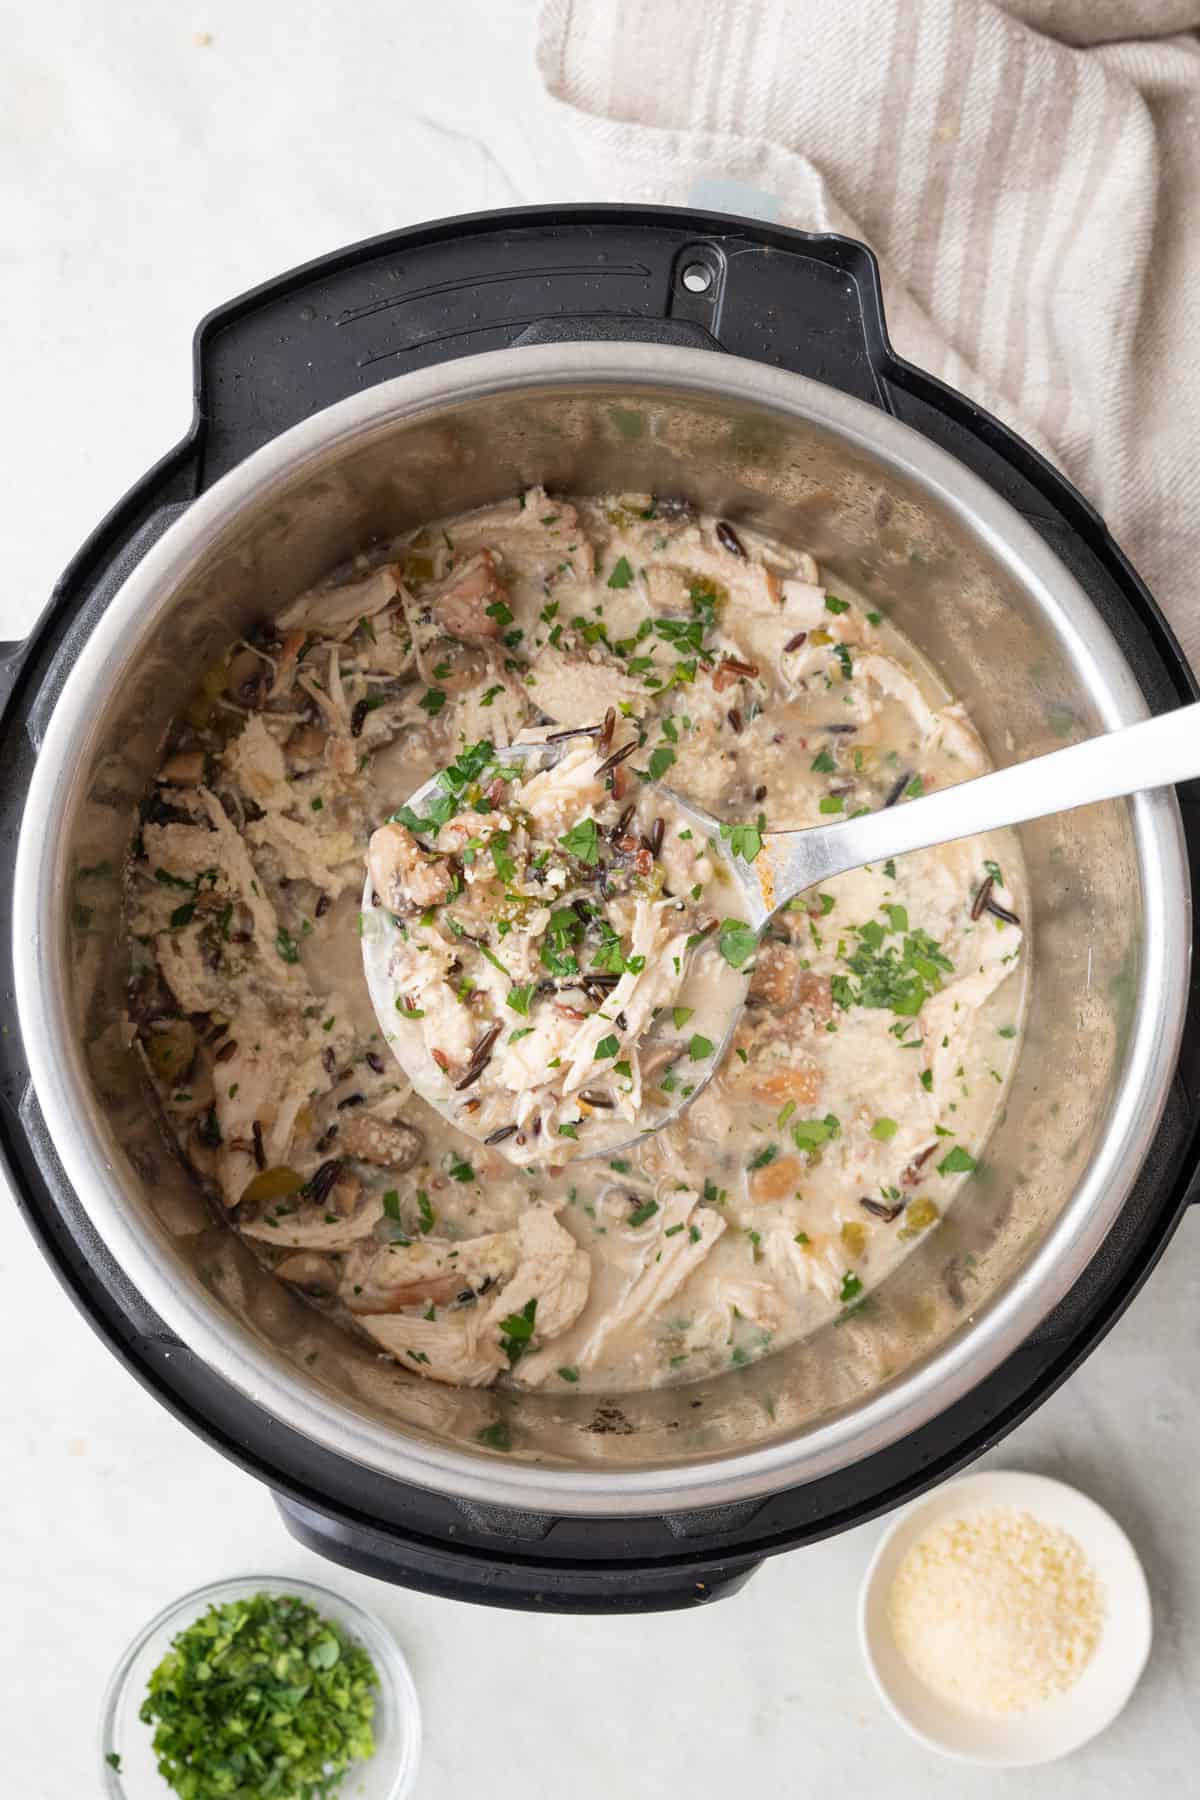 Ladle lifting up chicken and rice from an Instant Pot bowl.